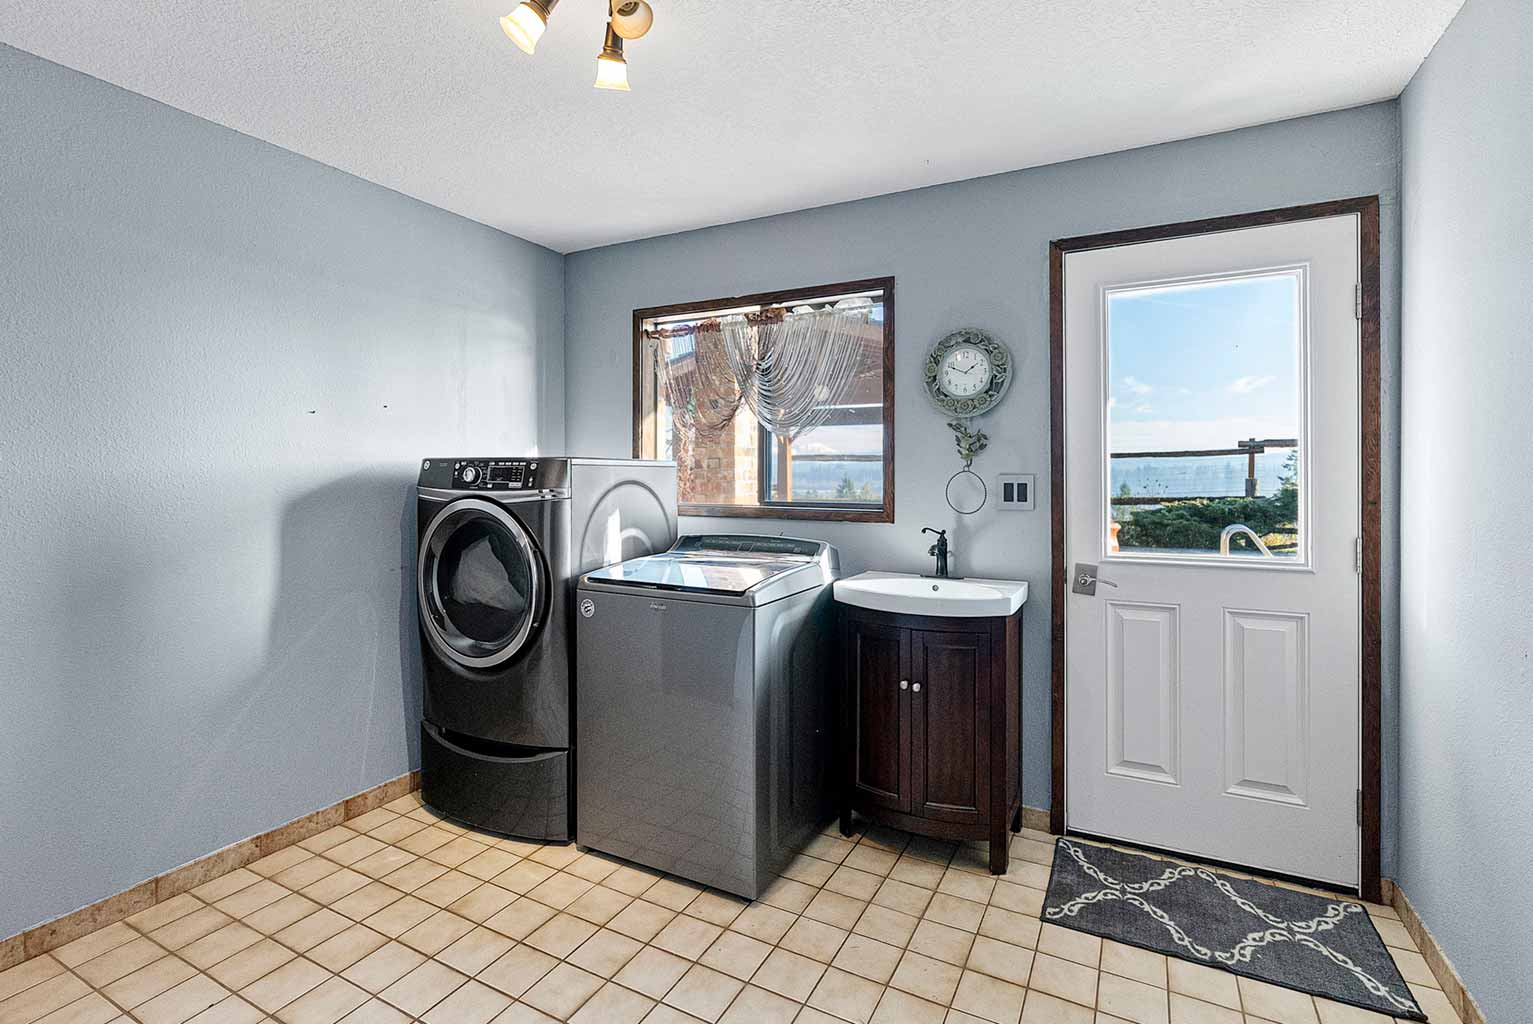 Laundry room on the lower level